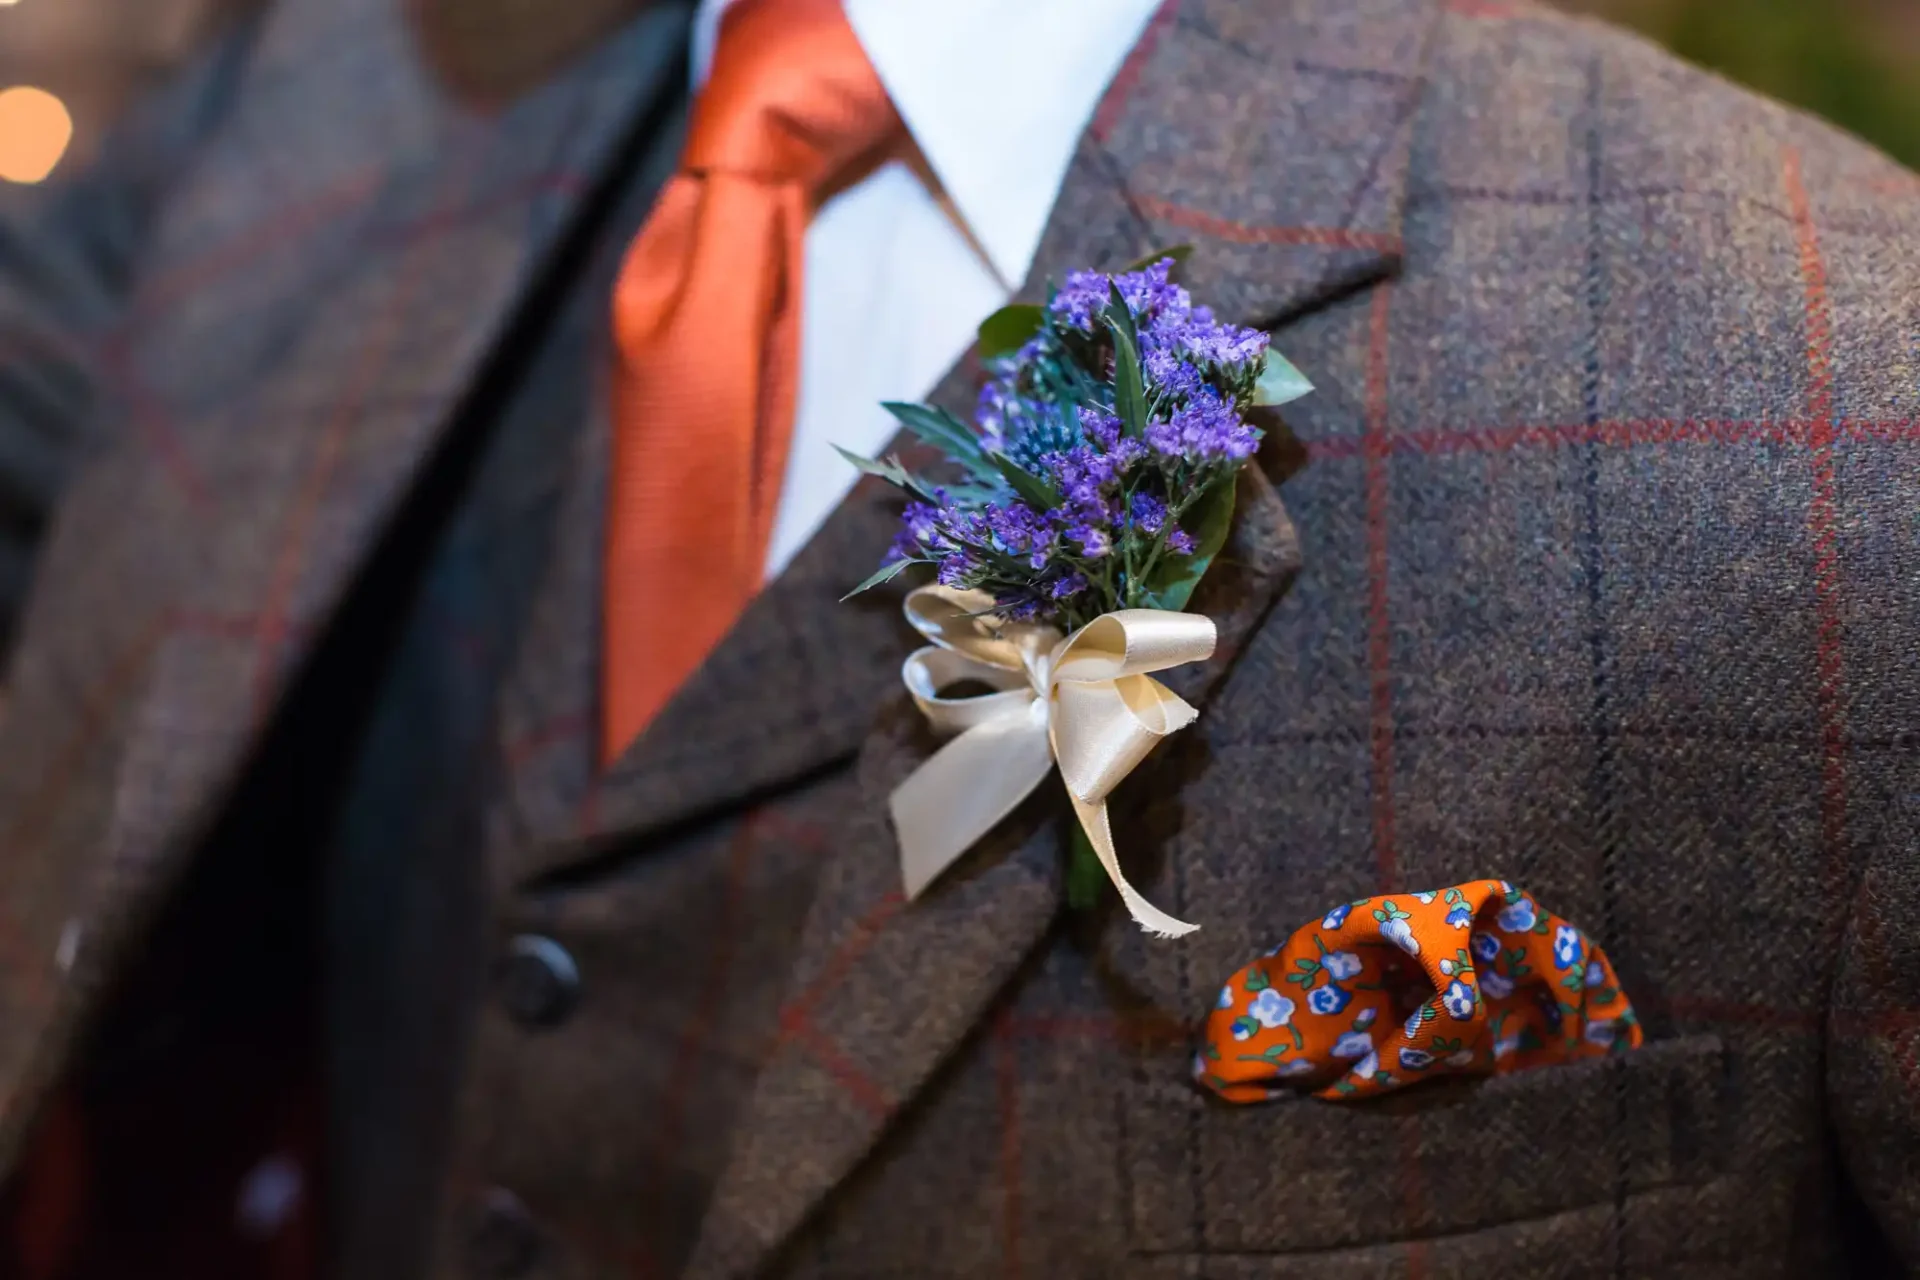 A close-up of a man's chest wearing a tweed suit with a purple patterned pocket square and a boutonniere featuring purple flowers and a cream ribbon.